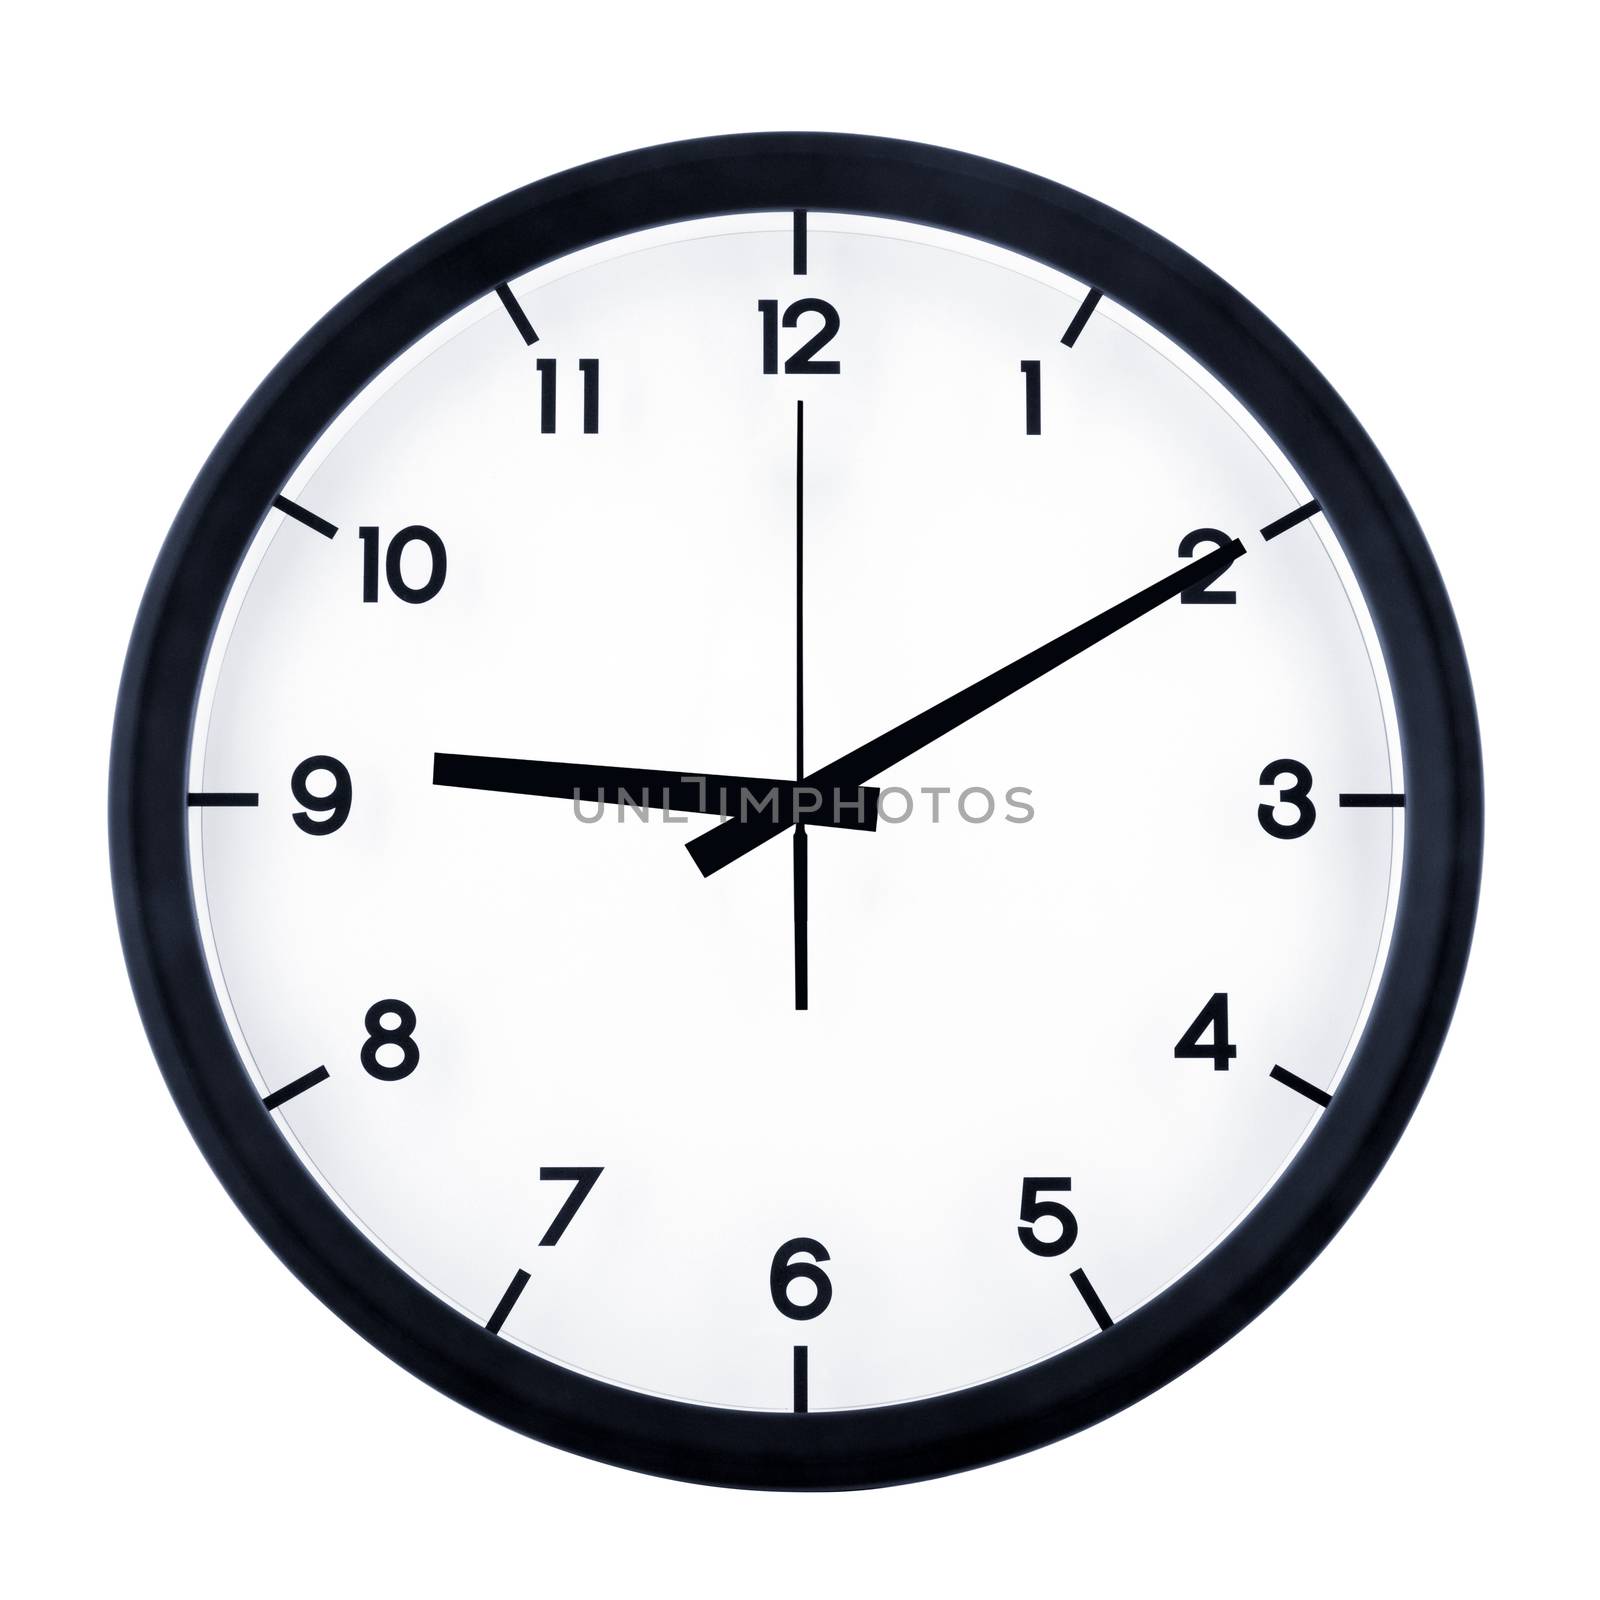 Classic analog clock pointing at nine ten, isolated on white background.